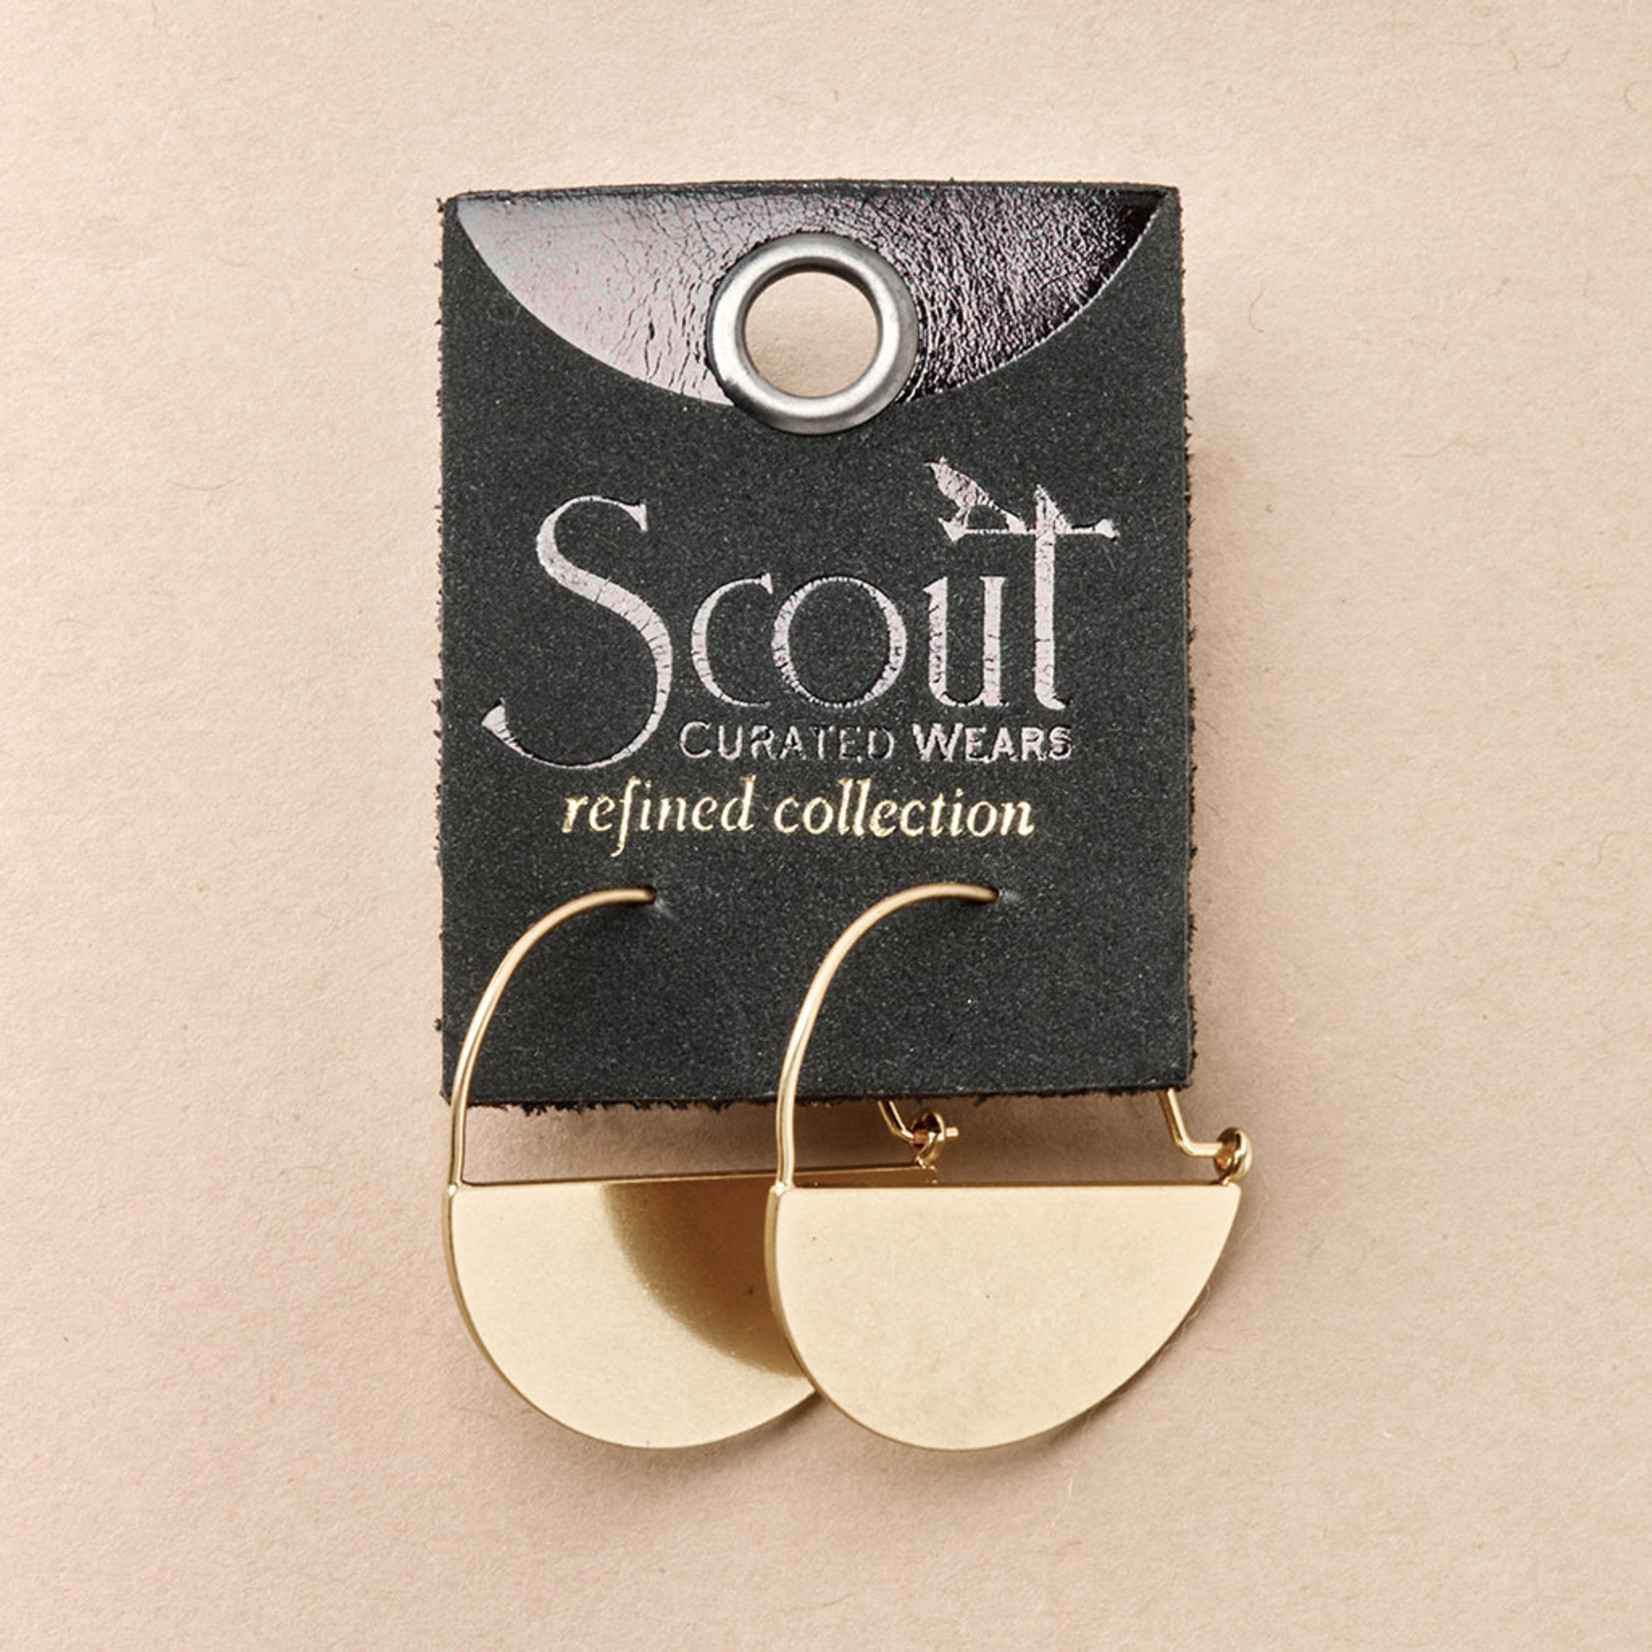 Scout Curated Wears Scout Curated Wears - Refined Earring Collection - Lunar Hoop/Gold Vermeil